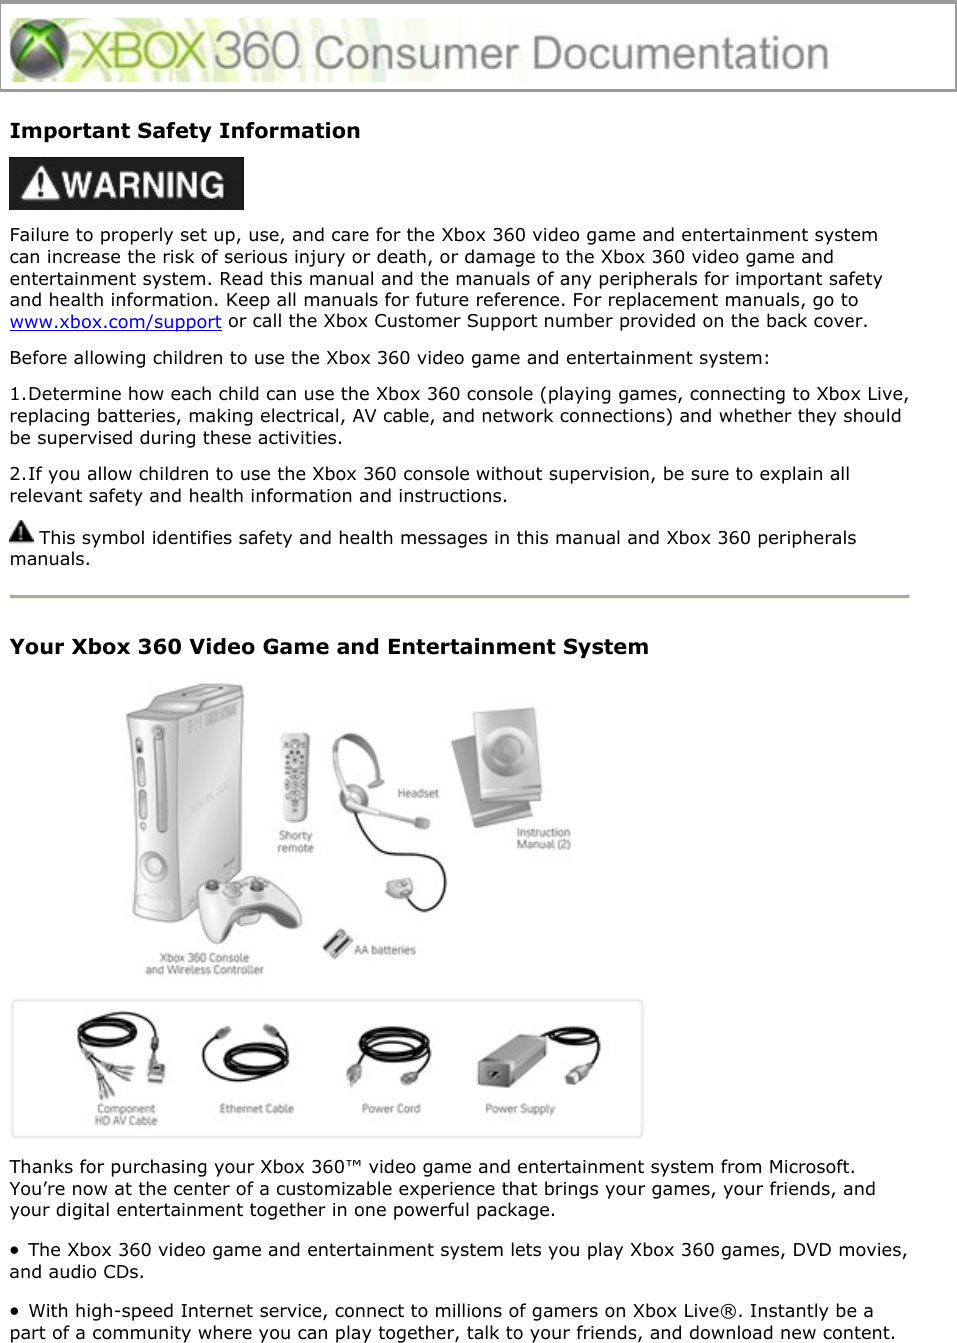  Important Safety Information  Failure to properly set up, use, and care for the Xbox 360 video game and entertainment system can increase the risk of serious injury or death, or damage to the Xbox 360 video game and entertainment system. Read this manual and the manuals of any peripherals for important safety and health information. Keep all manuals for future reference. For replacement manuals, go to www.xbox.com/support or call the Xbox Customer Support number provided on the back cover. Before allowing children to use the Xbox 360 video game and entertainment system: 1. Determine how each child can use the Xbox 360 console (playing games, connecting to Xbox Live, replacing batteries, making electrical, AV cable, and network connections) and whether they should be supervised during these activities.  2. If you allow children to use the Xbox 360 console without supervision, be sure to explain all relevant safety and health information and instructions.  This symbol identifies safety and health messages in this manual and Xbox 360 peripherals manuals.  Your Xbox 360 Video Game and Entertainment System  Thanks for purchasing your Xbox 360™ video game and entertainment system from Microsoft. You’re now at the center of a customizable experience that brings your games, your friends, and your digital entertainment together in one powerful package. •  The Xbox 360 video game and entertainment system lets you play Xbox 360 games, DVD movies, and audio CDs.  •  With high-speed Internet service, connect to millions of gamers on Xbox Live®. Instantly be a part of a community where you can play together, talk to your friends, and download new content. 